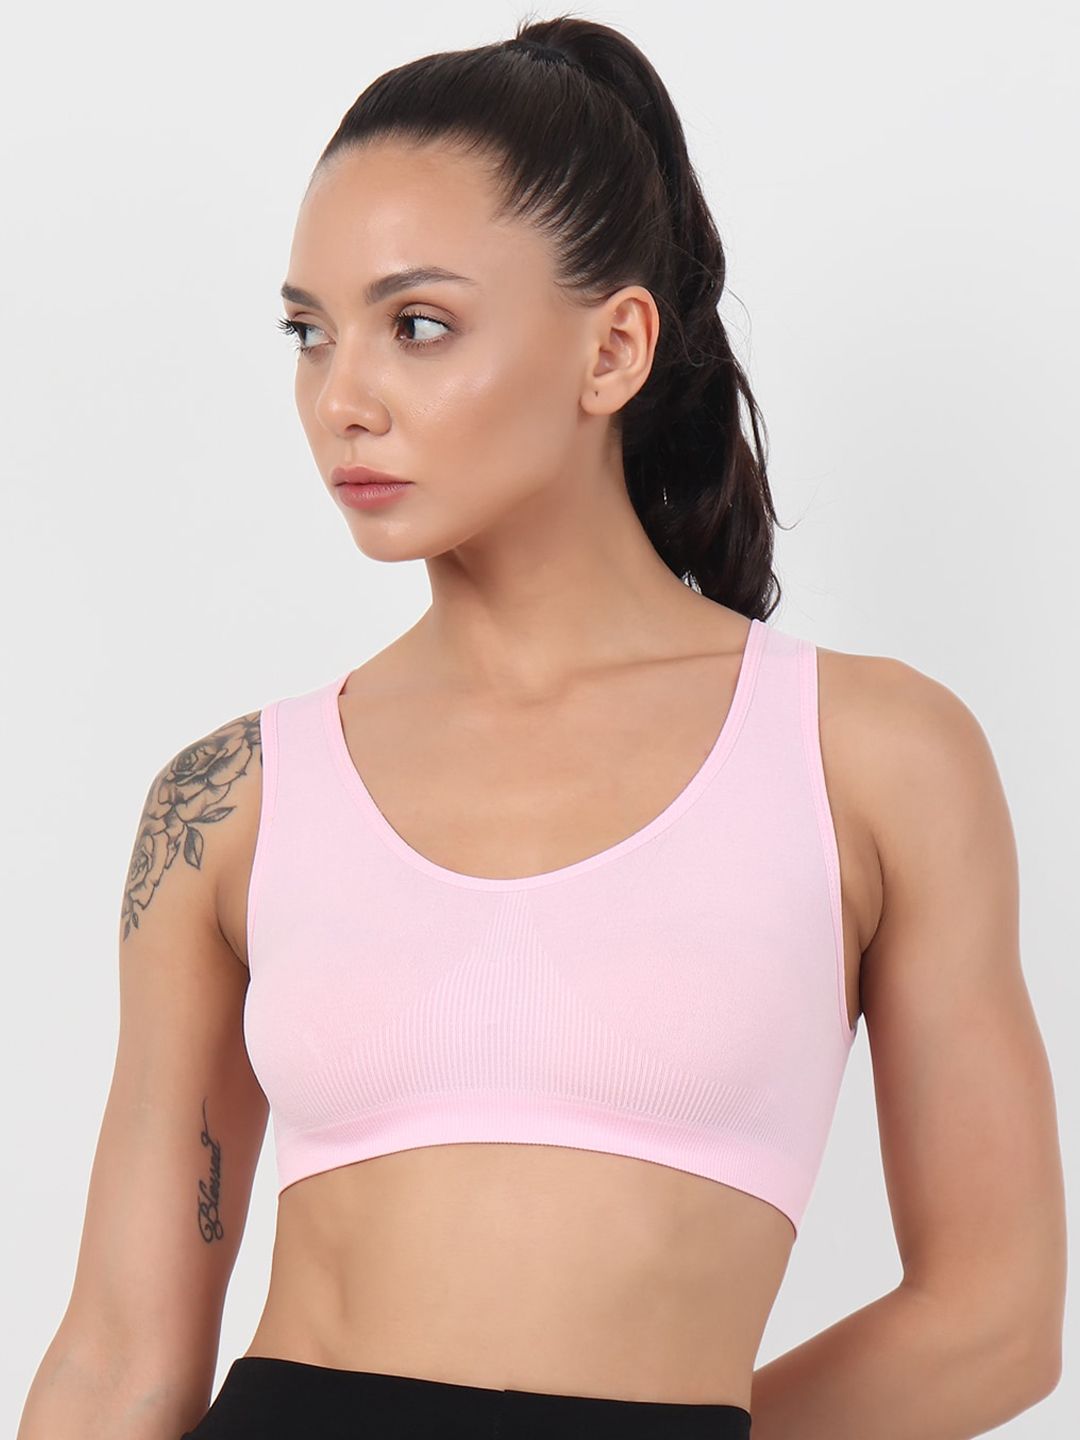 XOXO Design Pink Solid Workout Bra Price in India